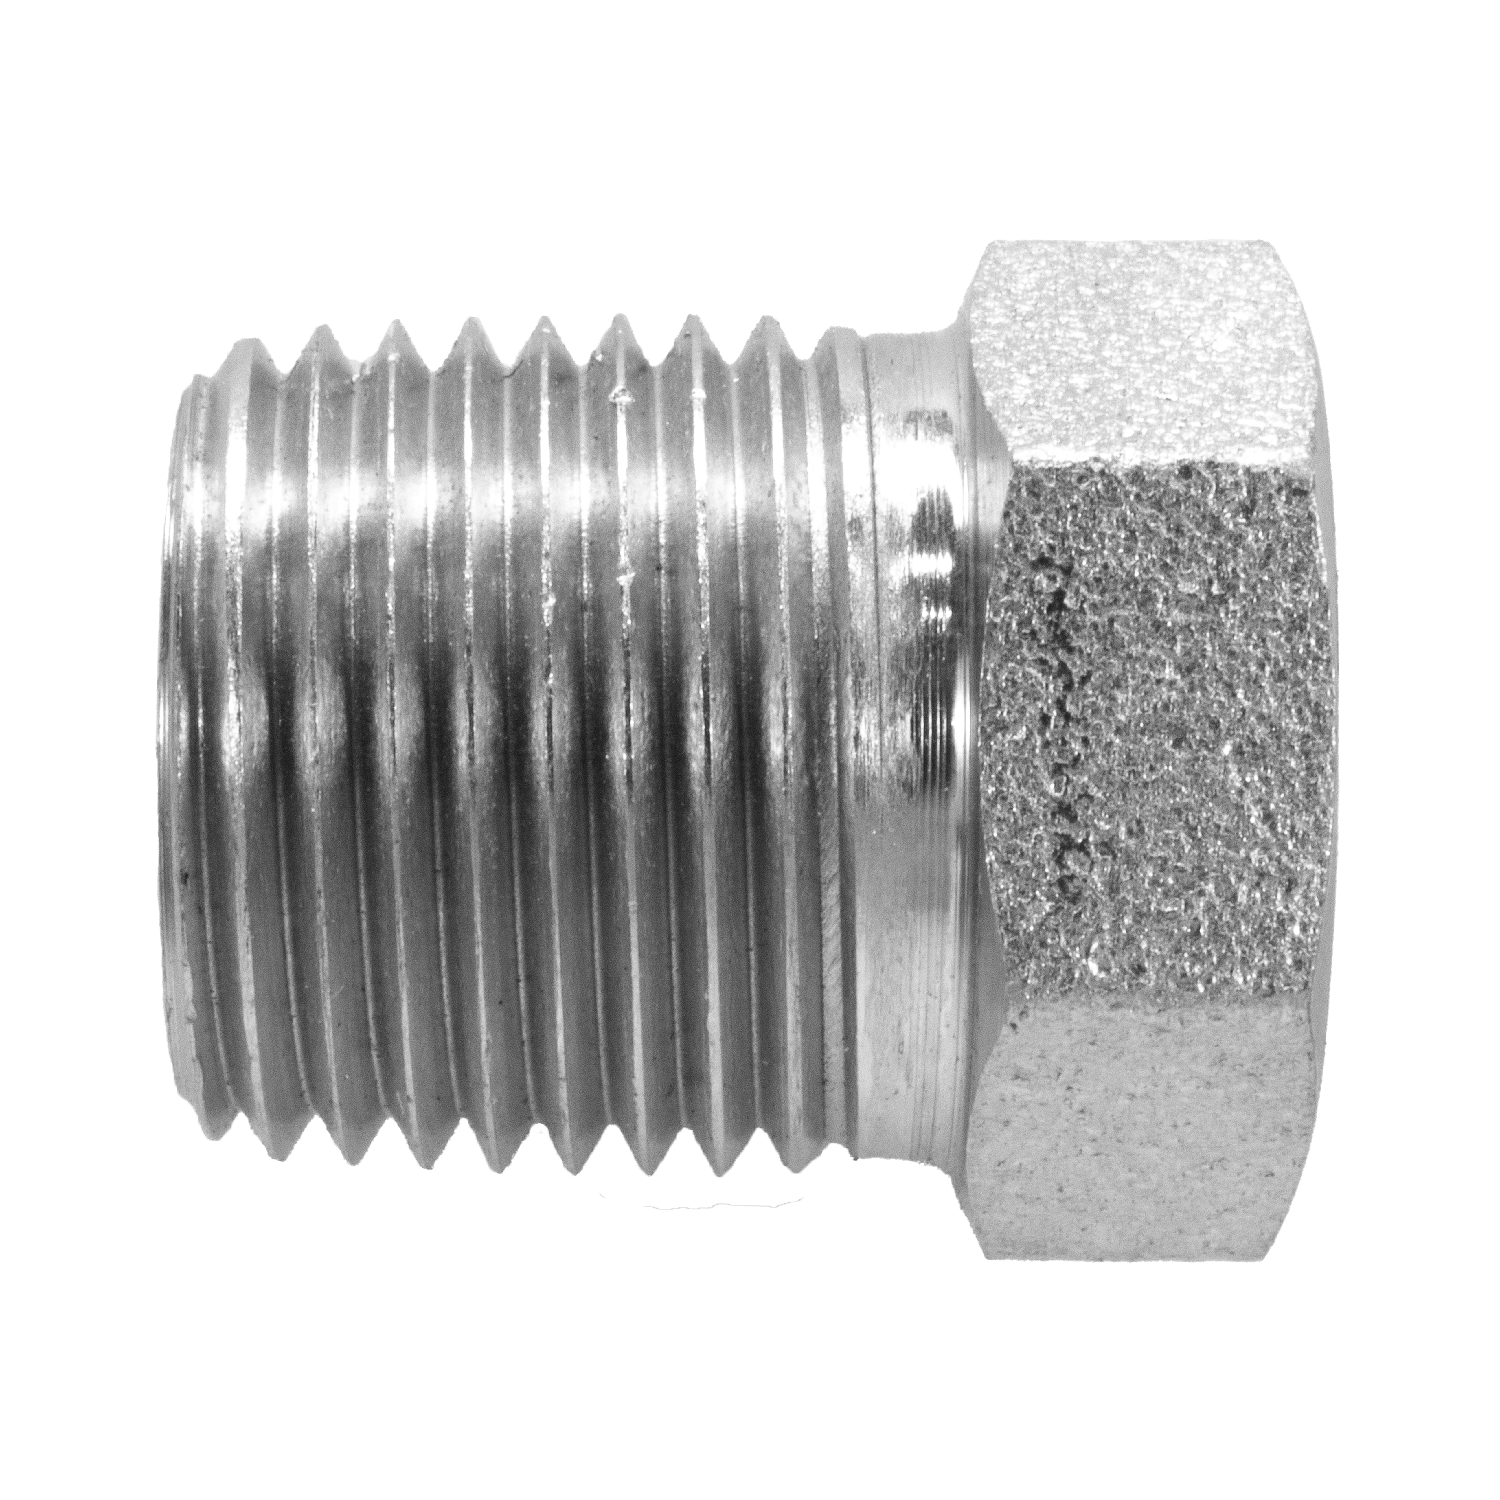 5406-adapters-fittings